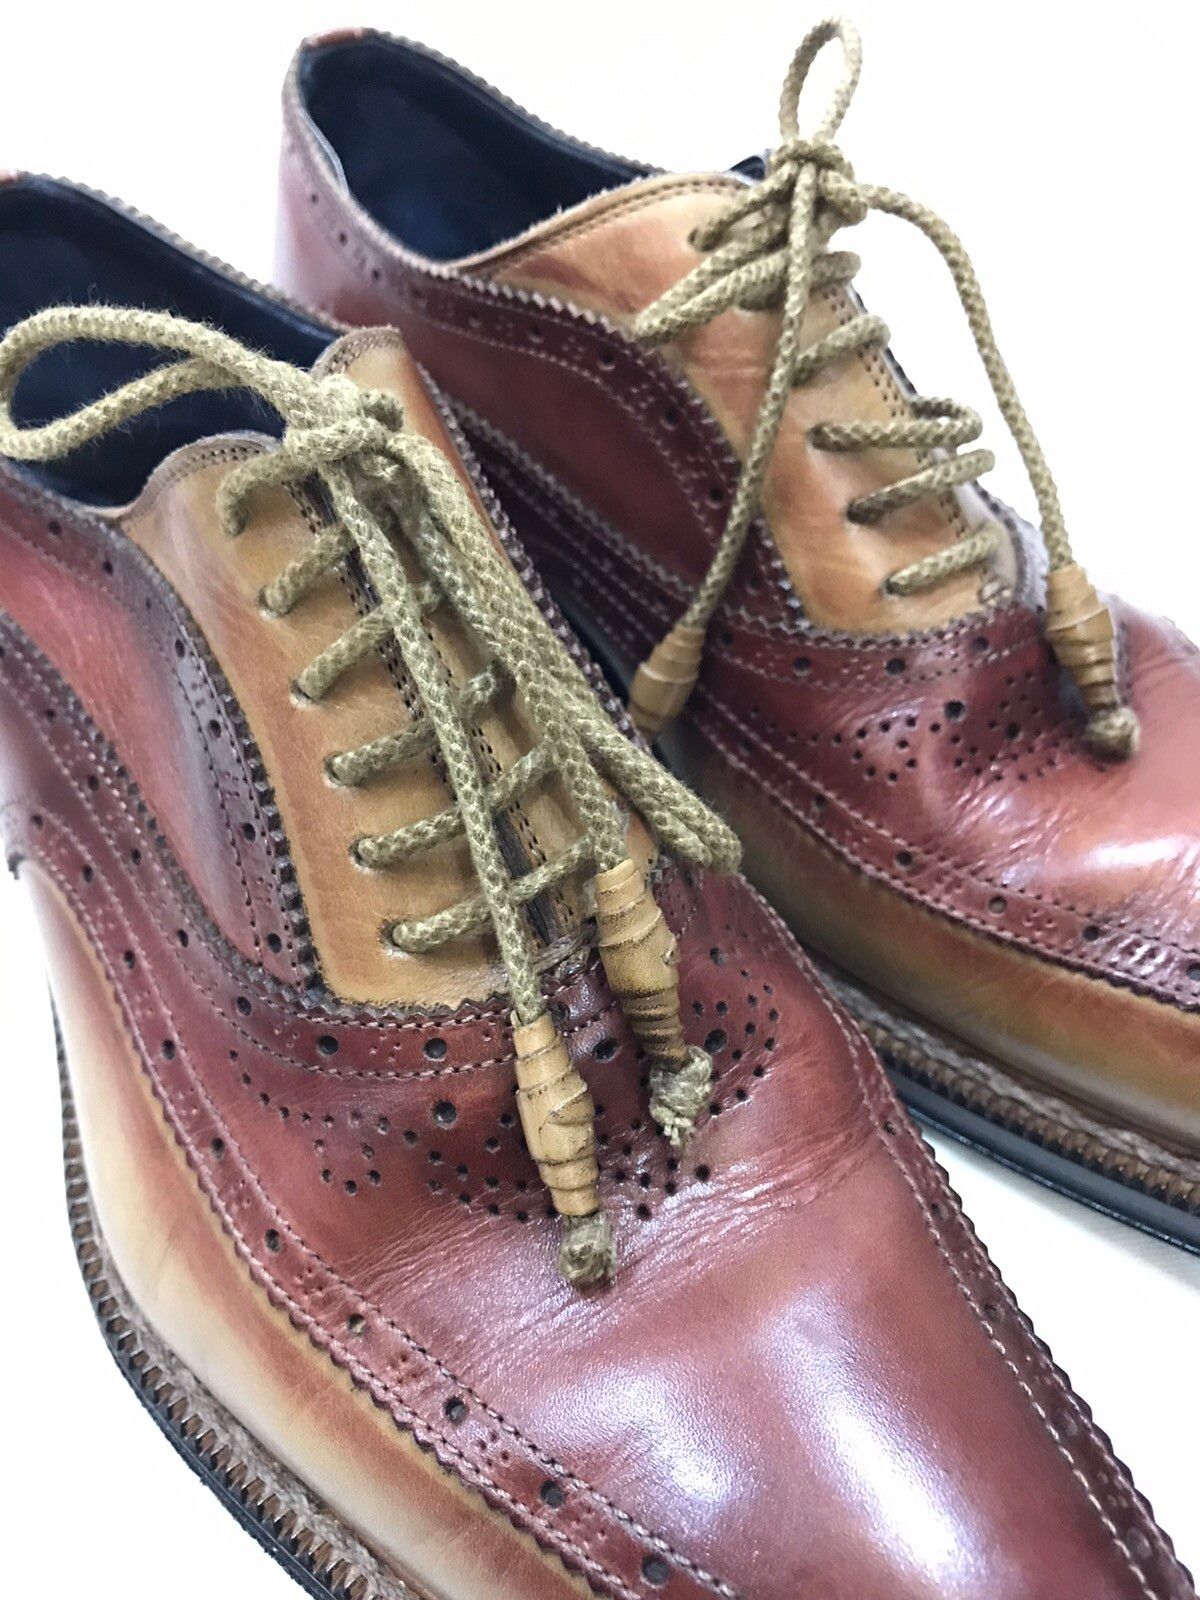 Handmade STEFANO BRANCHINI WINGTIP HANDMADE LEATHER SHOES SIZE 6 Size US 6 / EU 39 - 7 Preview